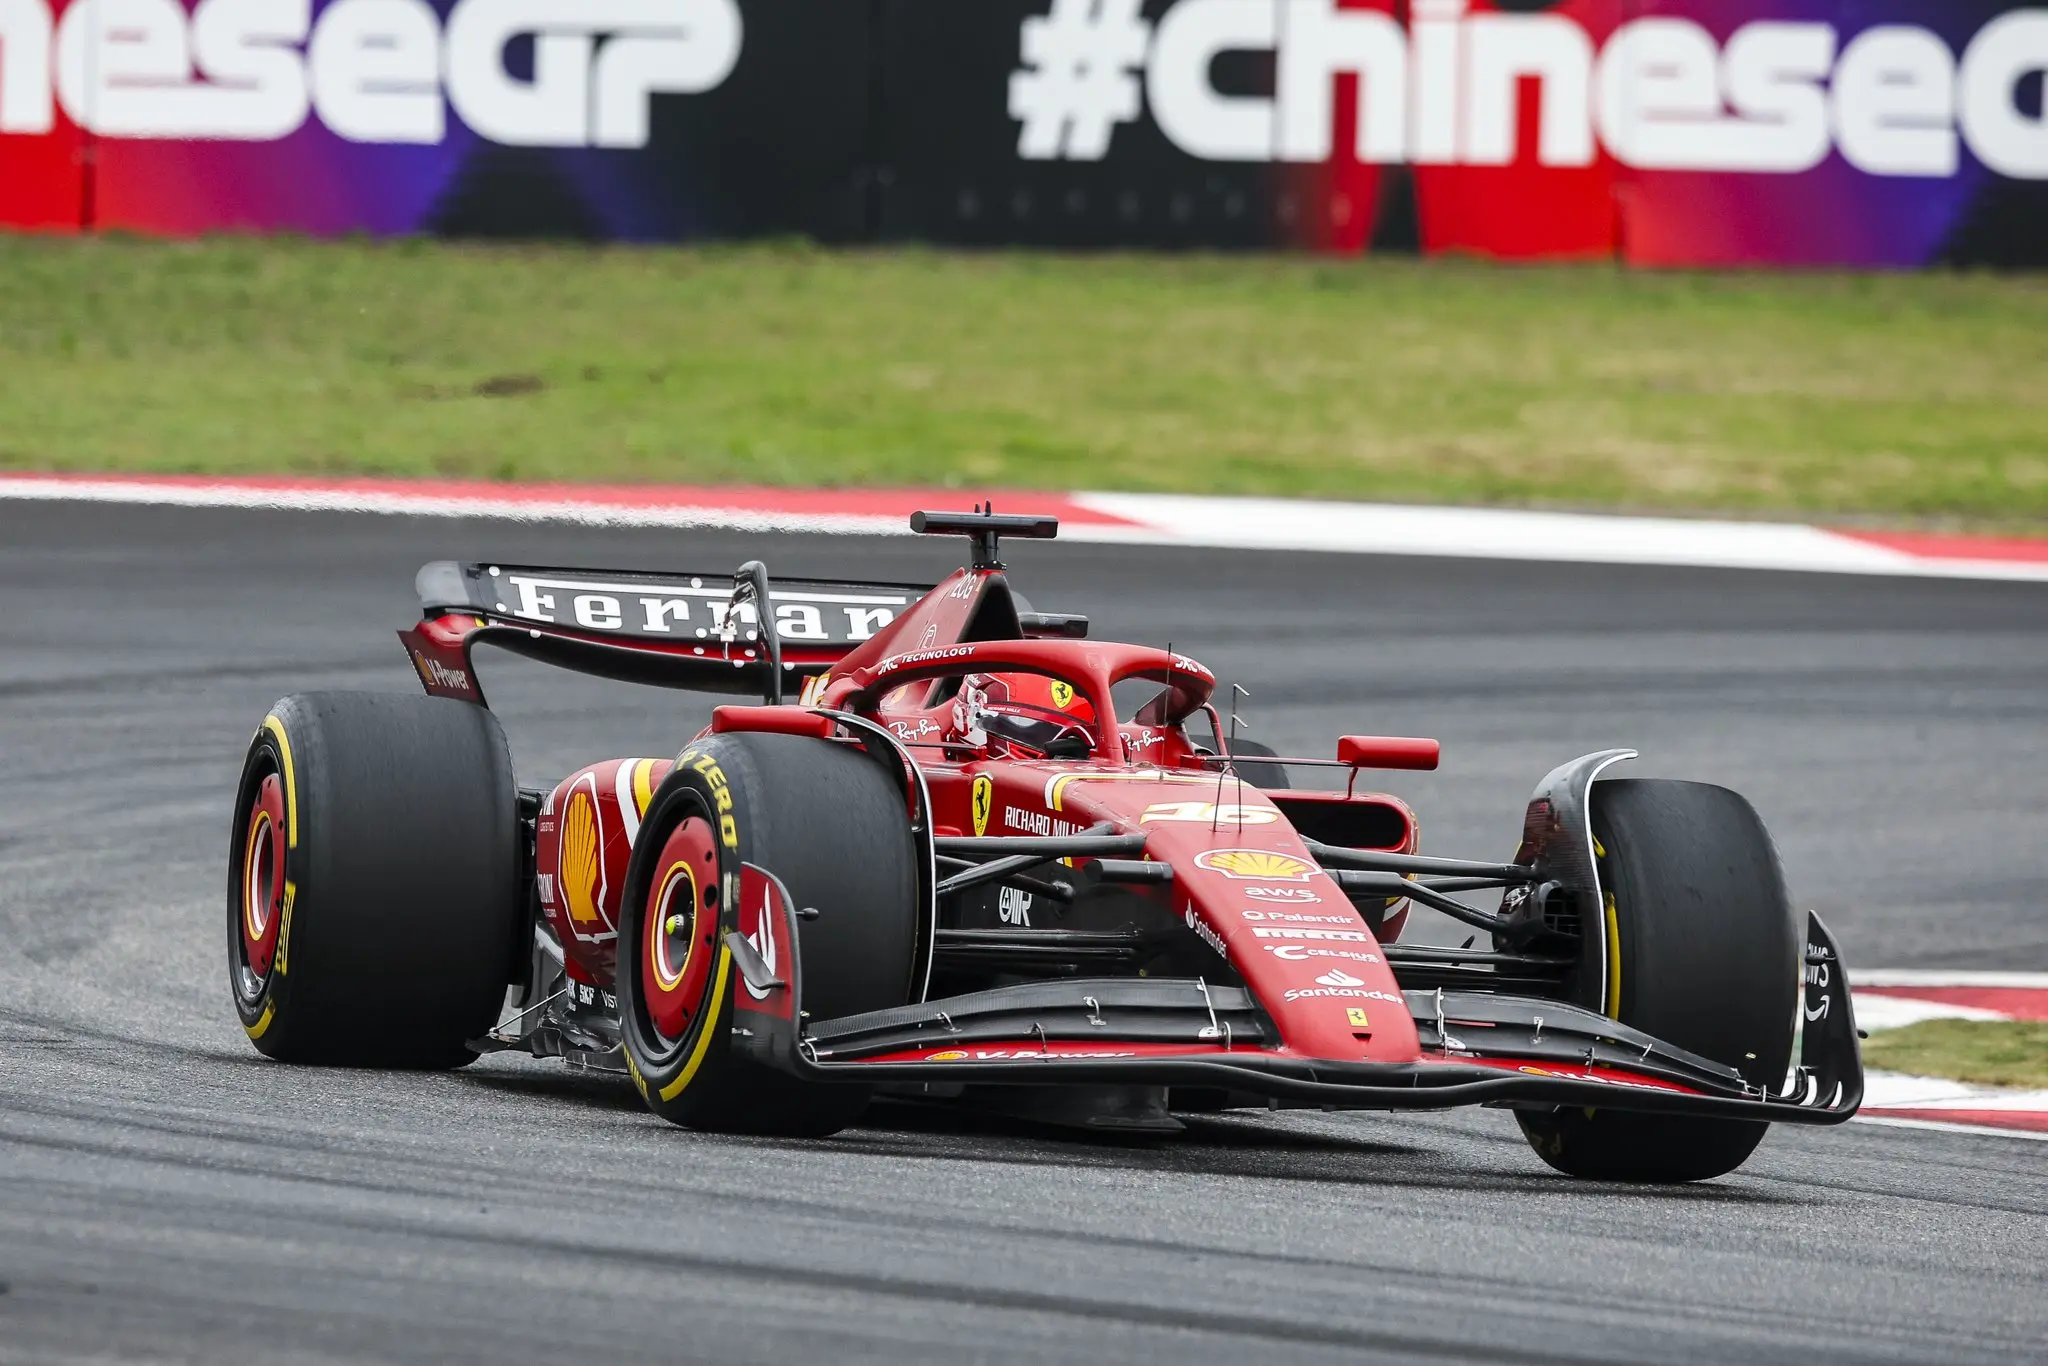 Leclerc on track in Shanghai